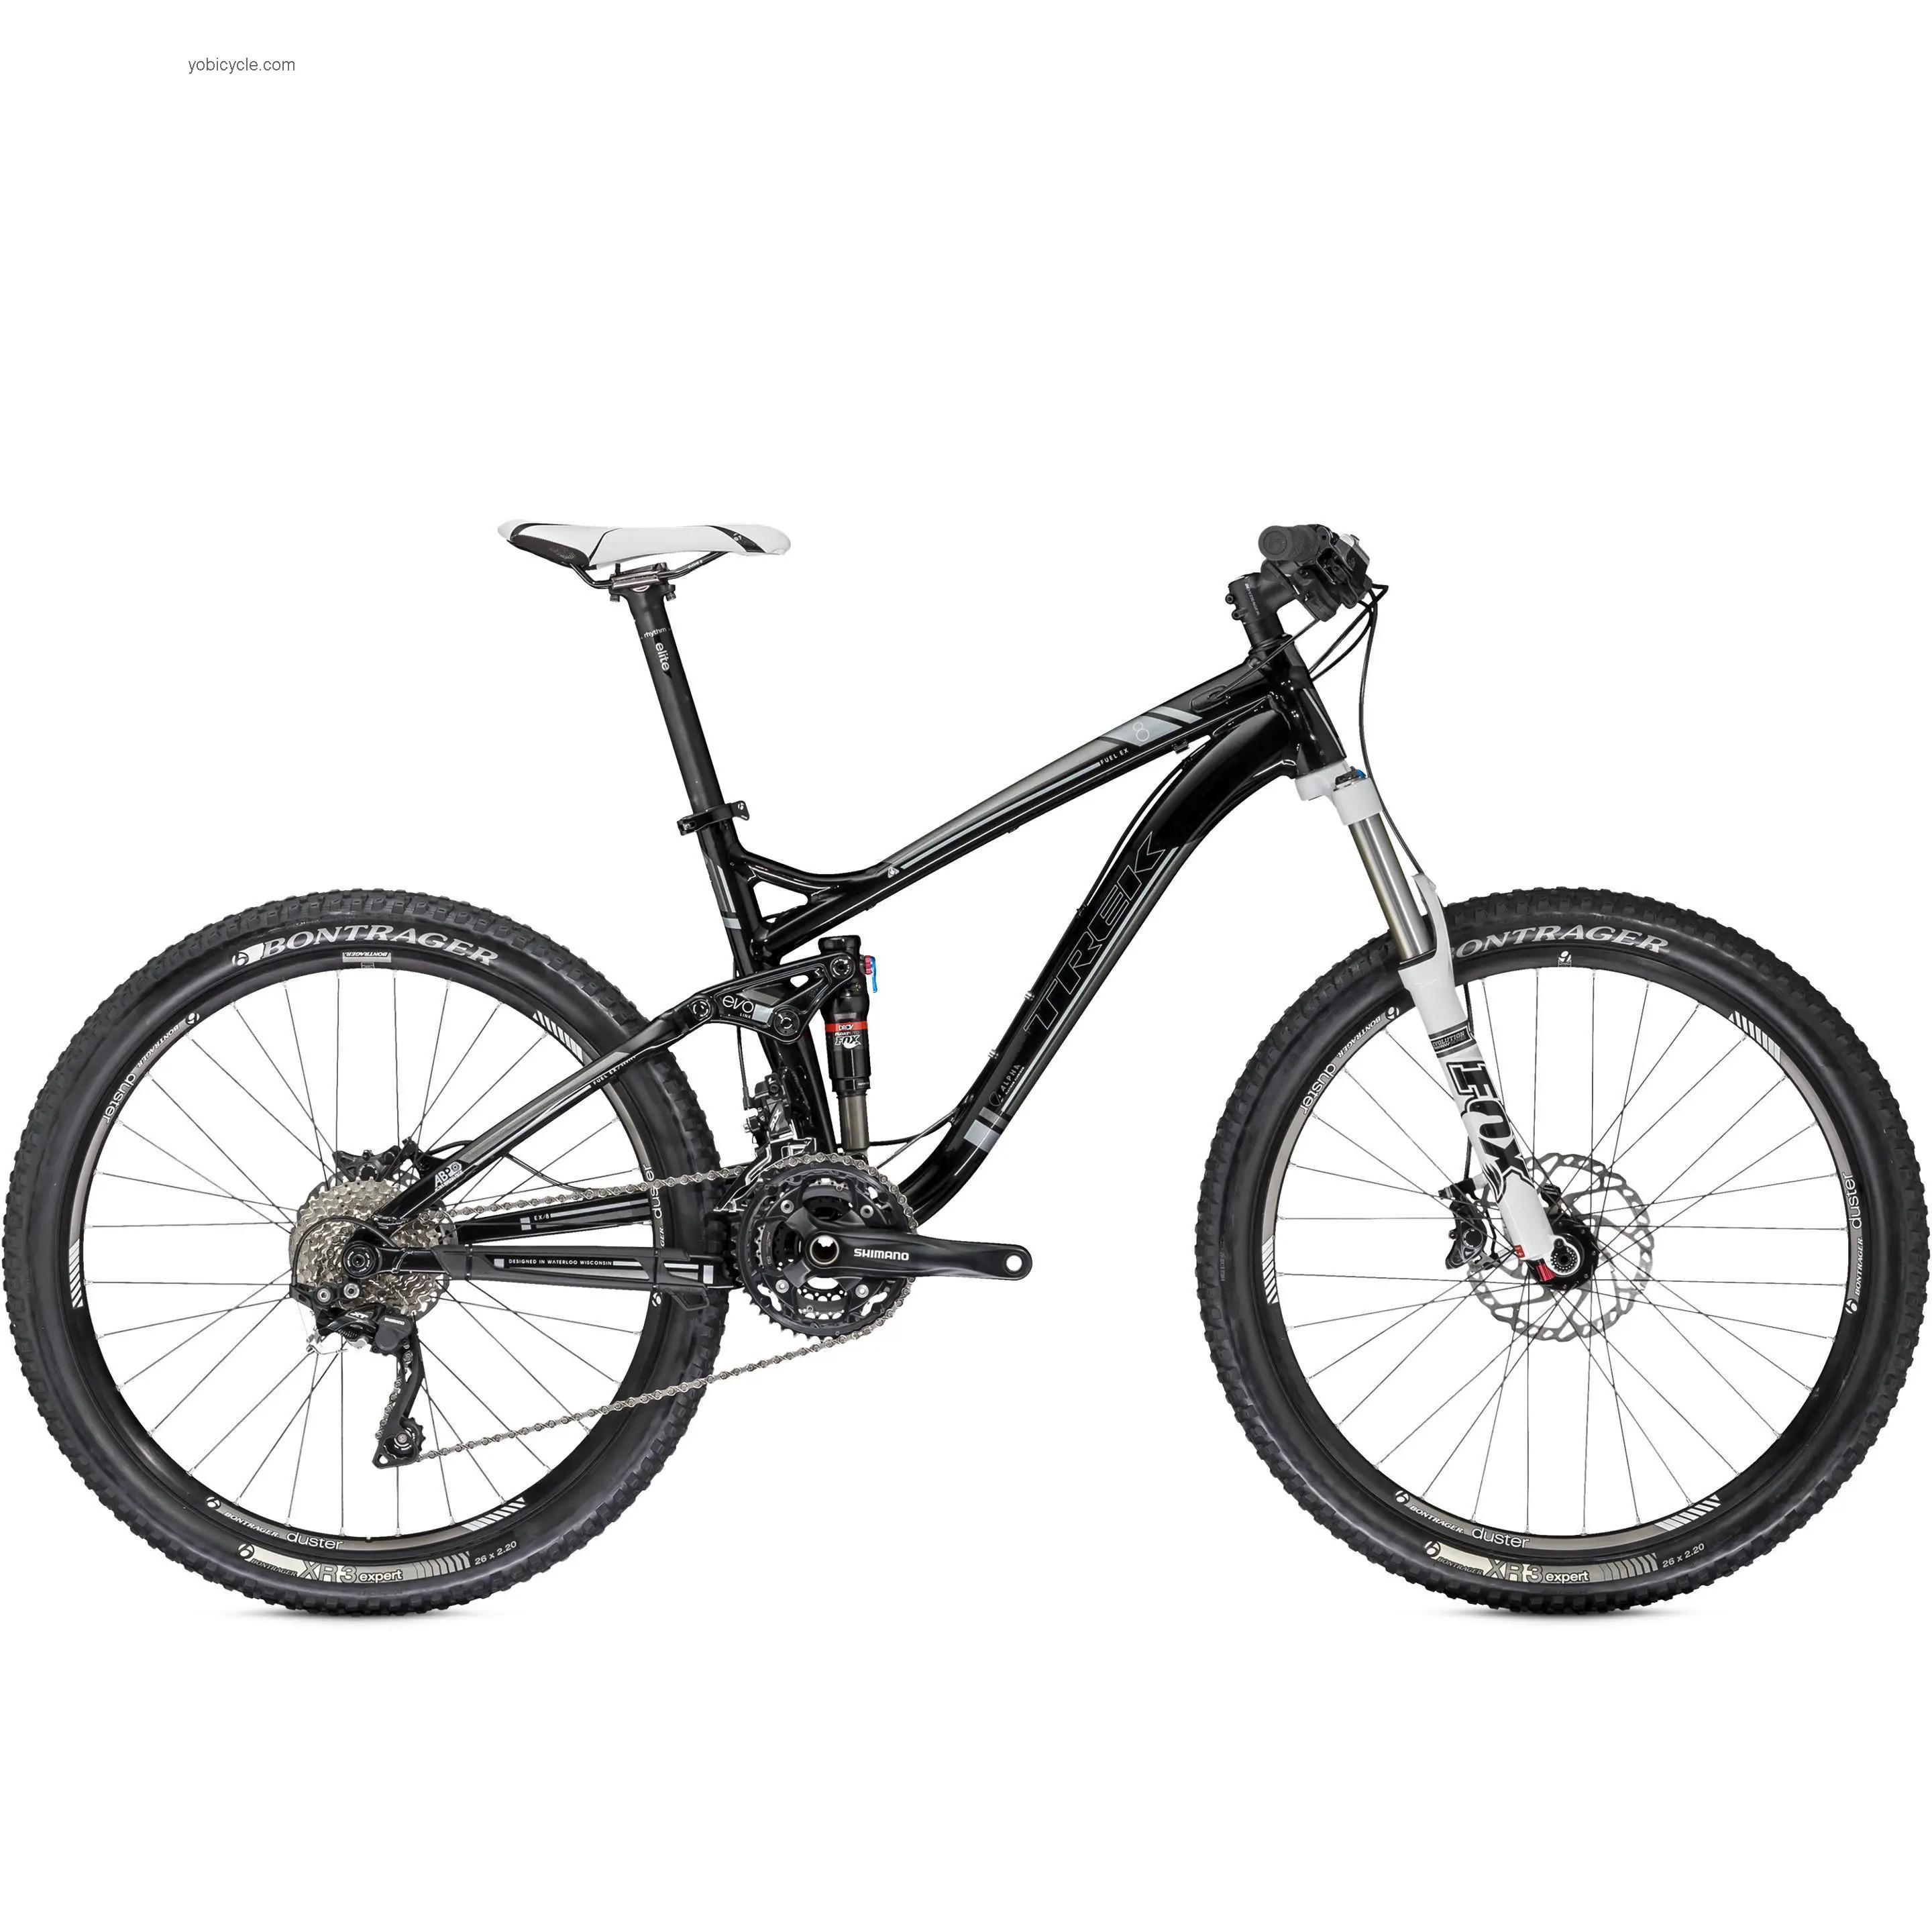 Trek Fuel EX 8 26 competitors and comparison tool online specs and performance